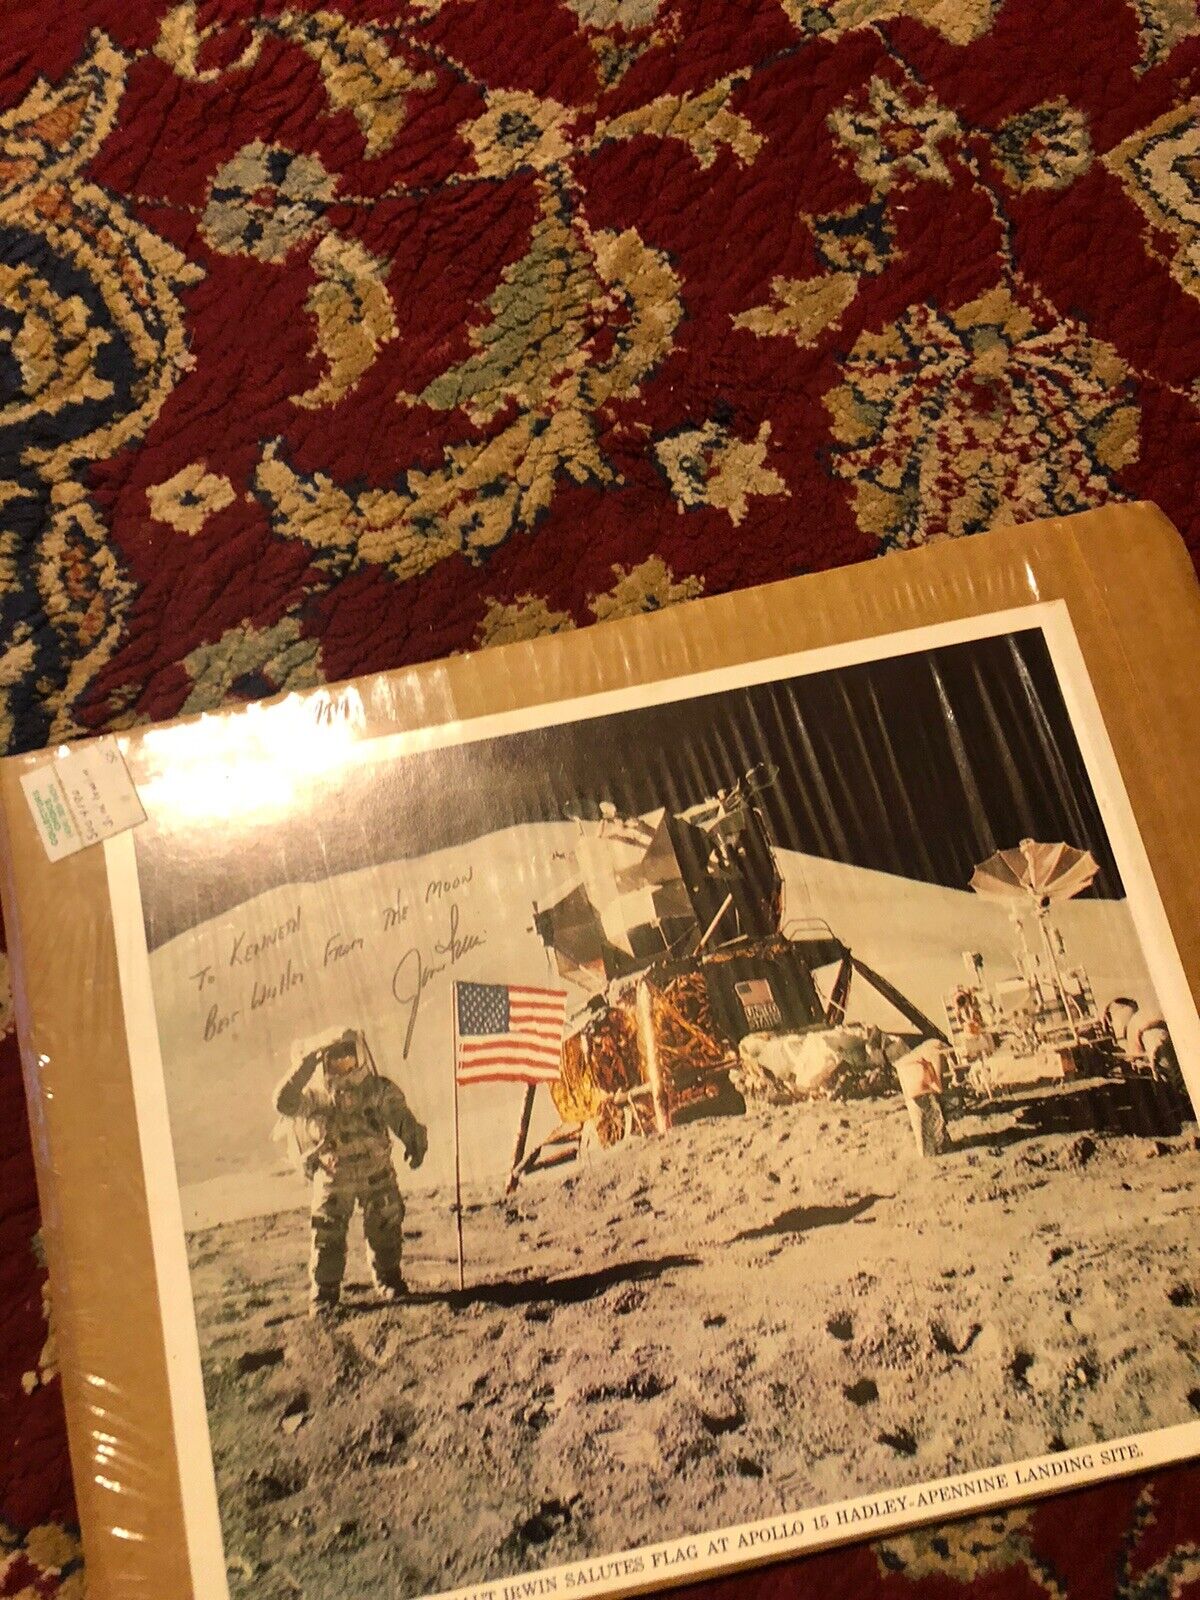 Apollo 15 Moonwalker Jim Irwin Signed Lithograph With Business Card On The Back.